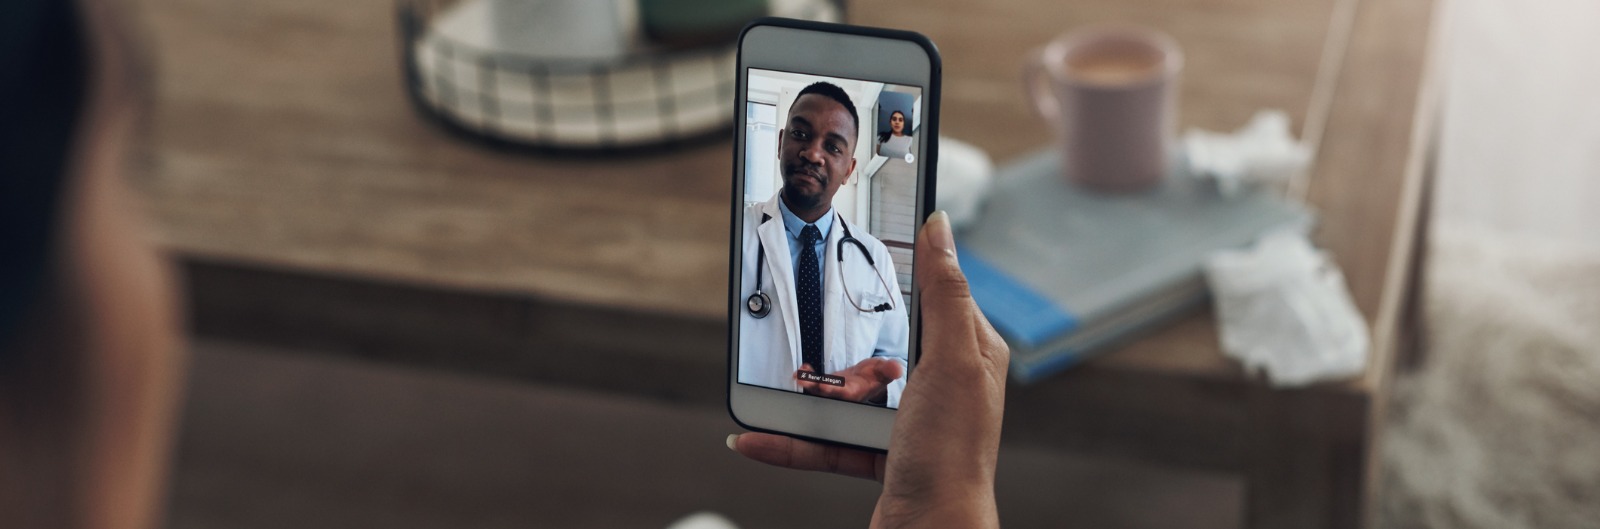 shot-of-an-unrecognizable-person-on-a-videocall-with-a-doctor-picture-id1600x529.jpg